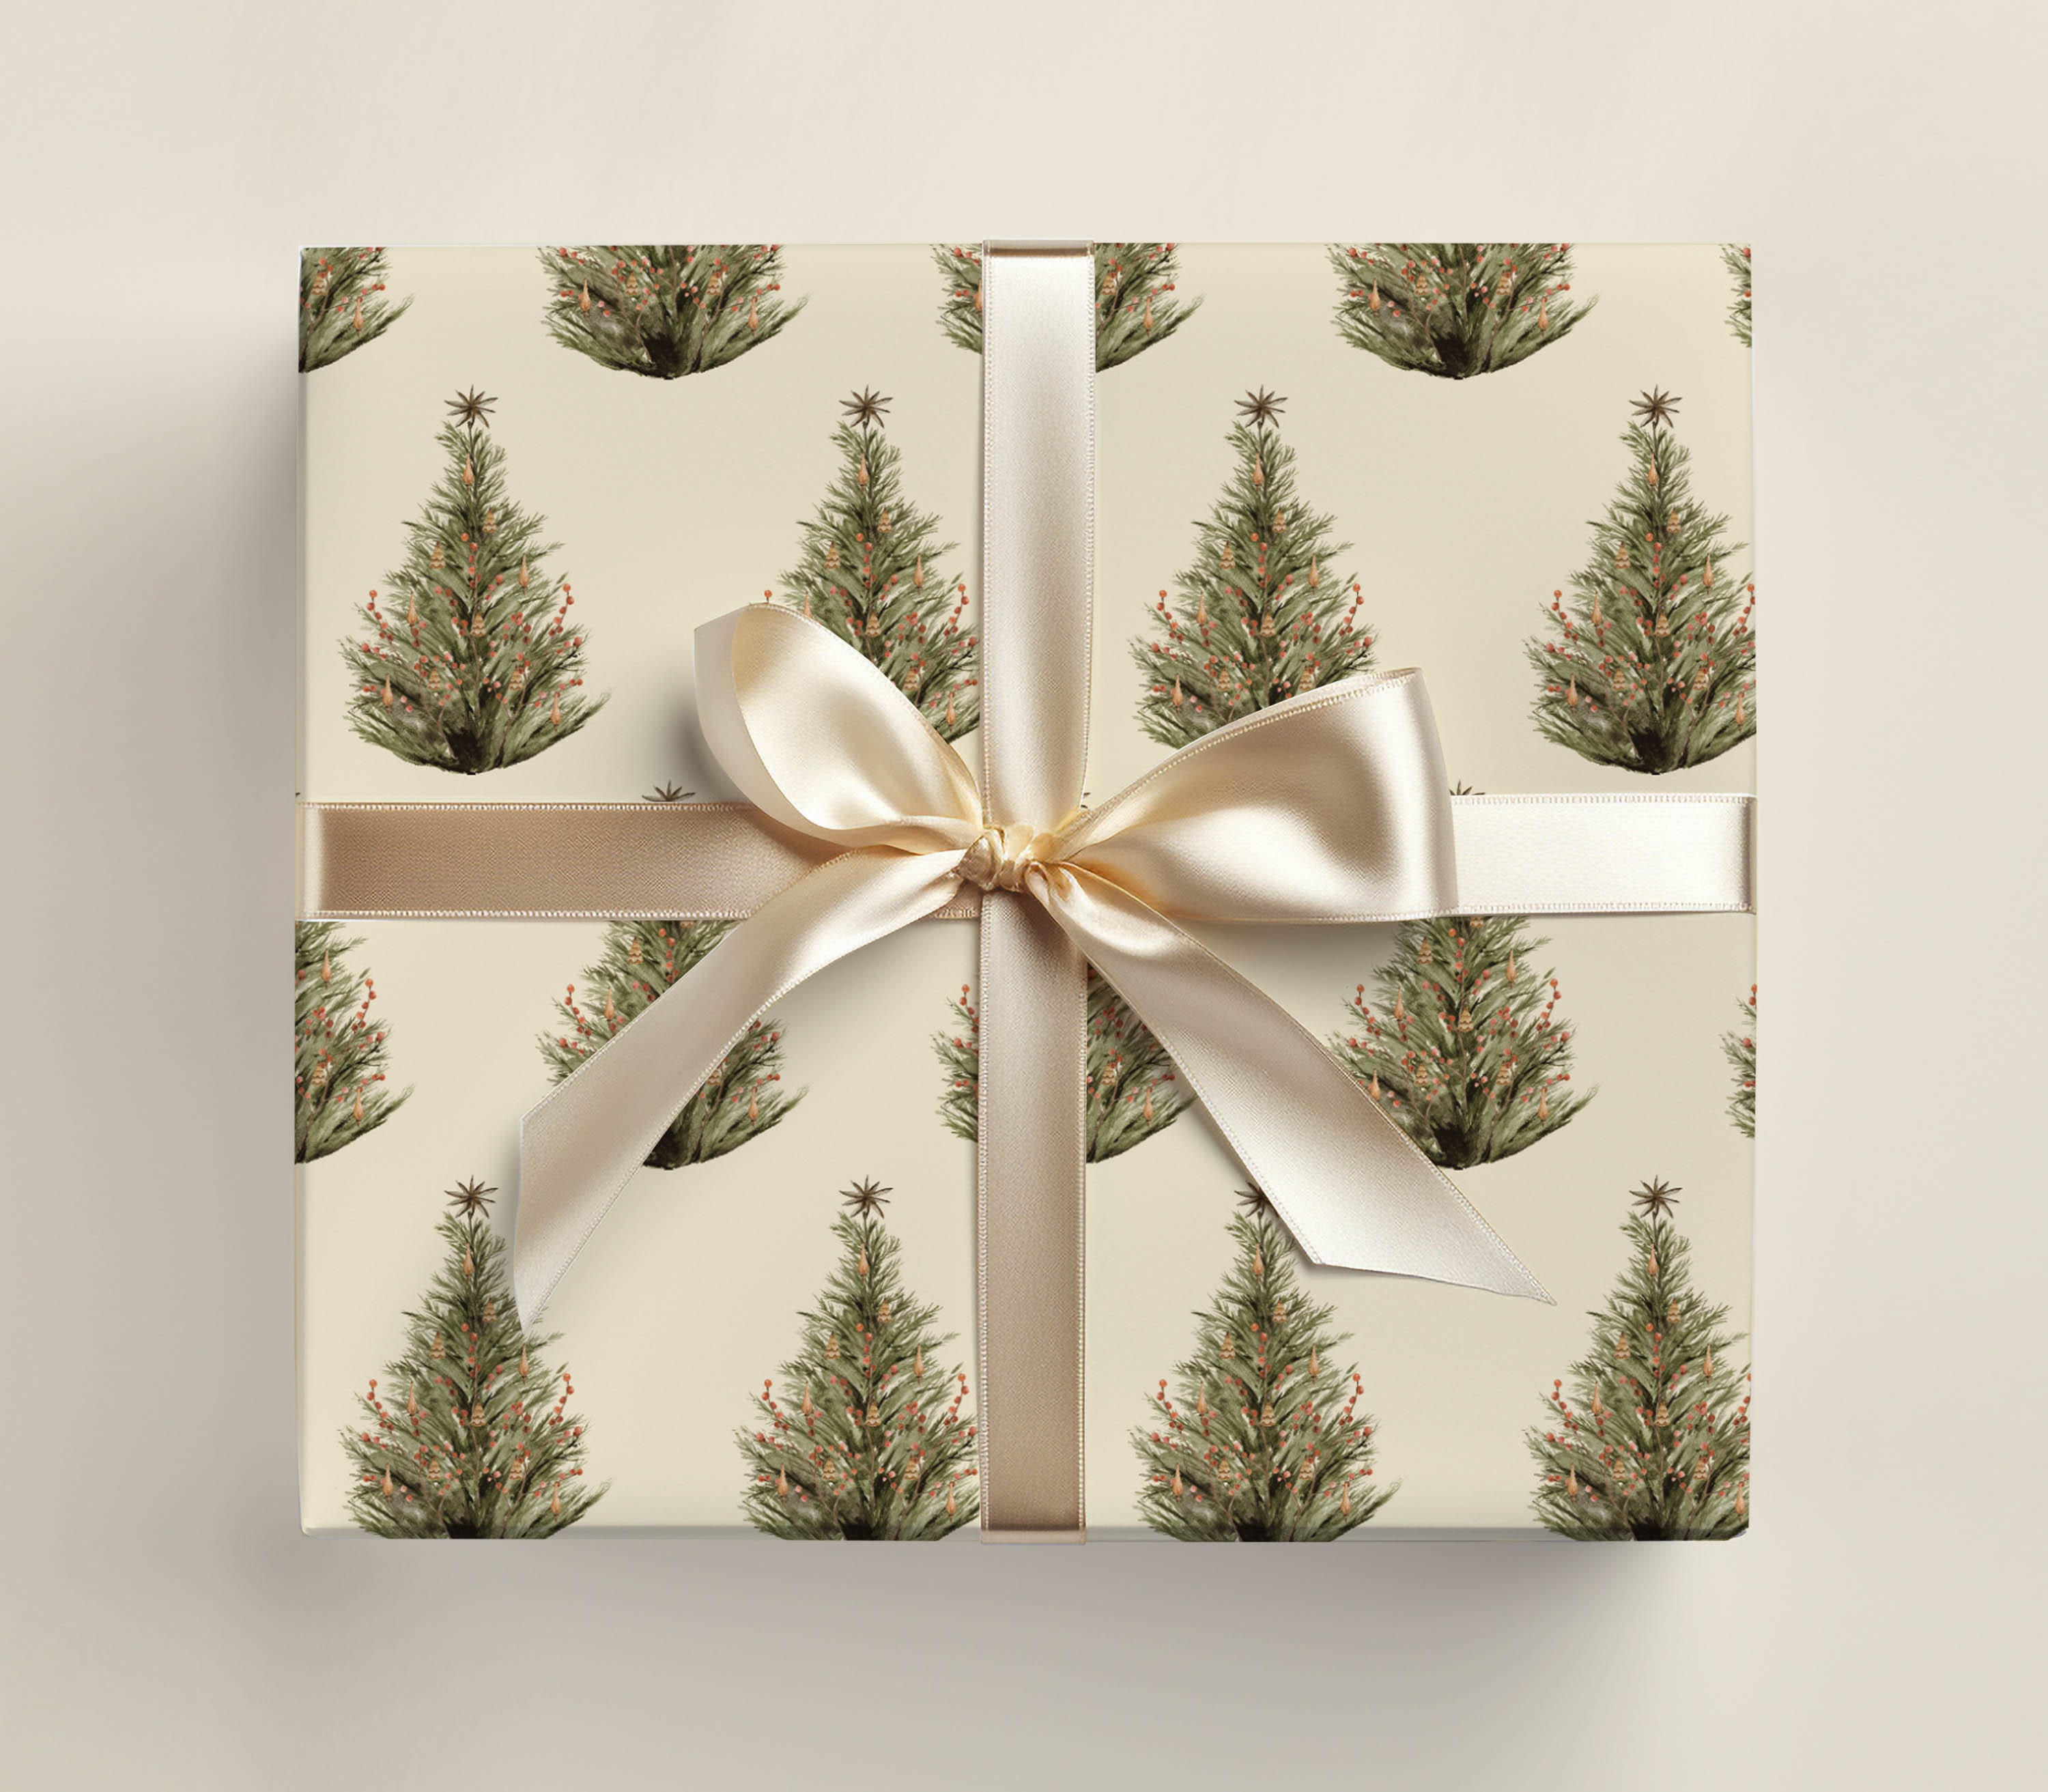 Rustic Earth Tone Christmas Wrapping Paper, Earth Tone Designs